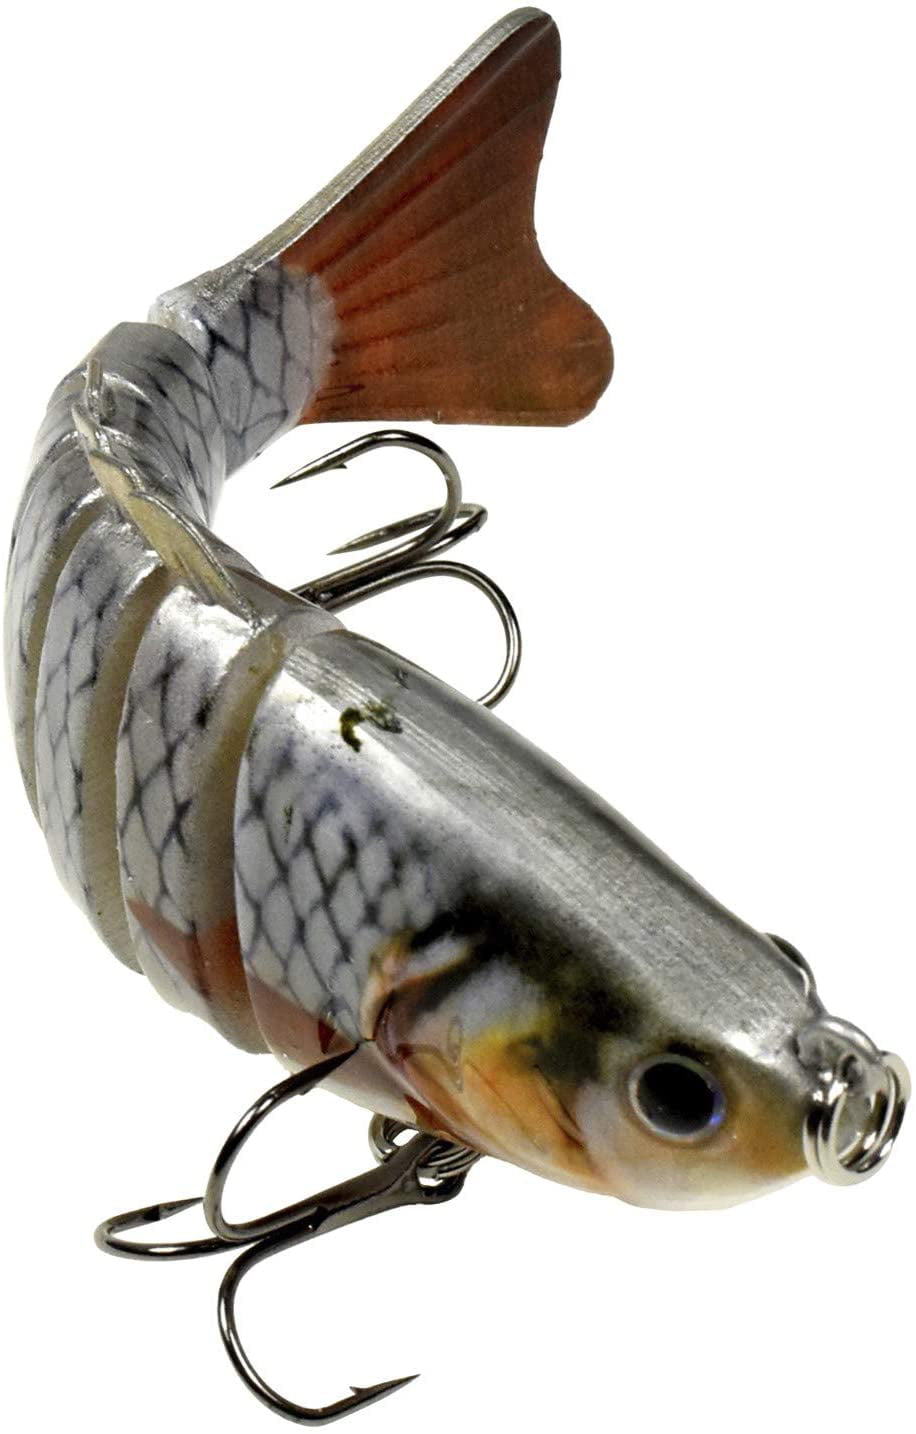 HQRP 3.9 Fishing Lure 0.6oz Freshwater Lakes River Fish Bait Jointed  Multi-Section S-Shaped Topwater